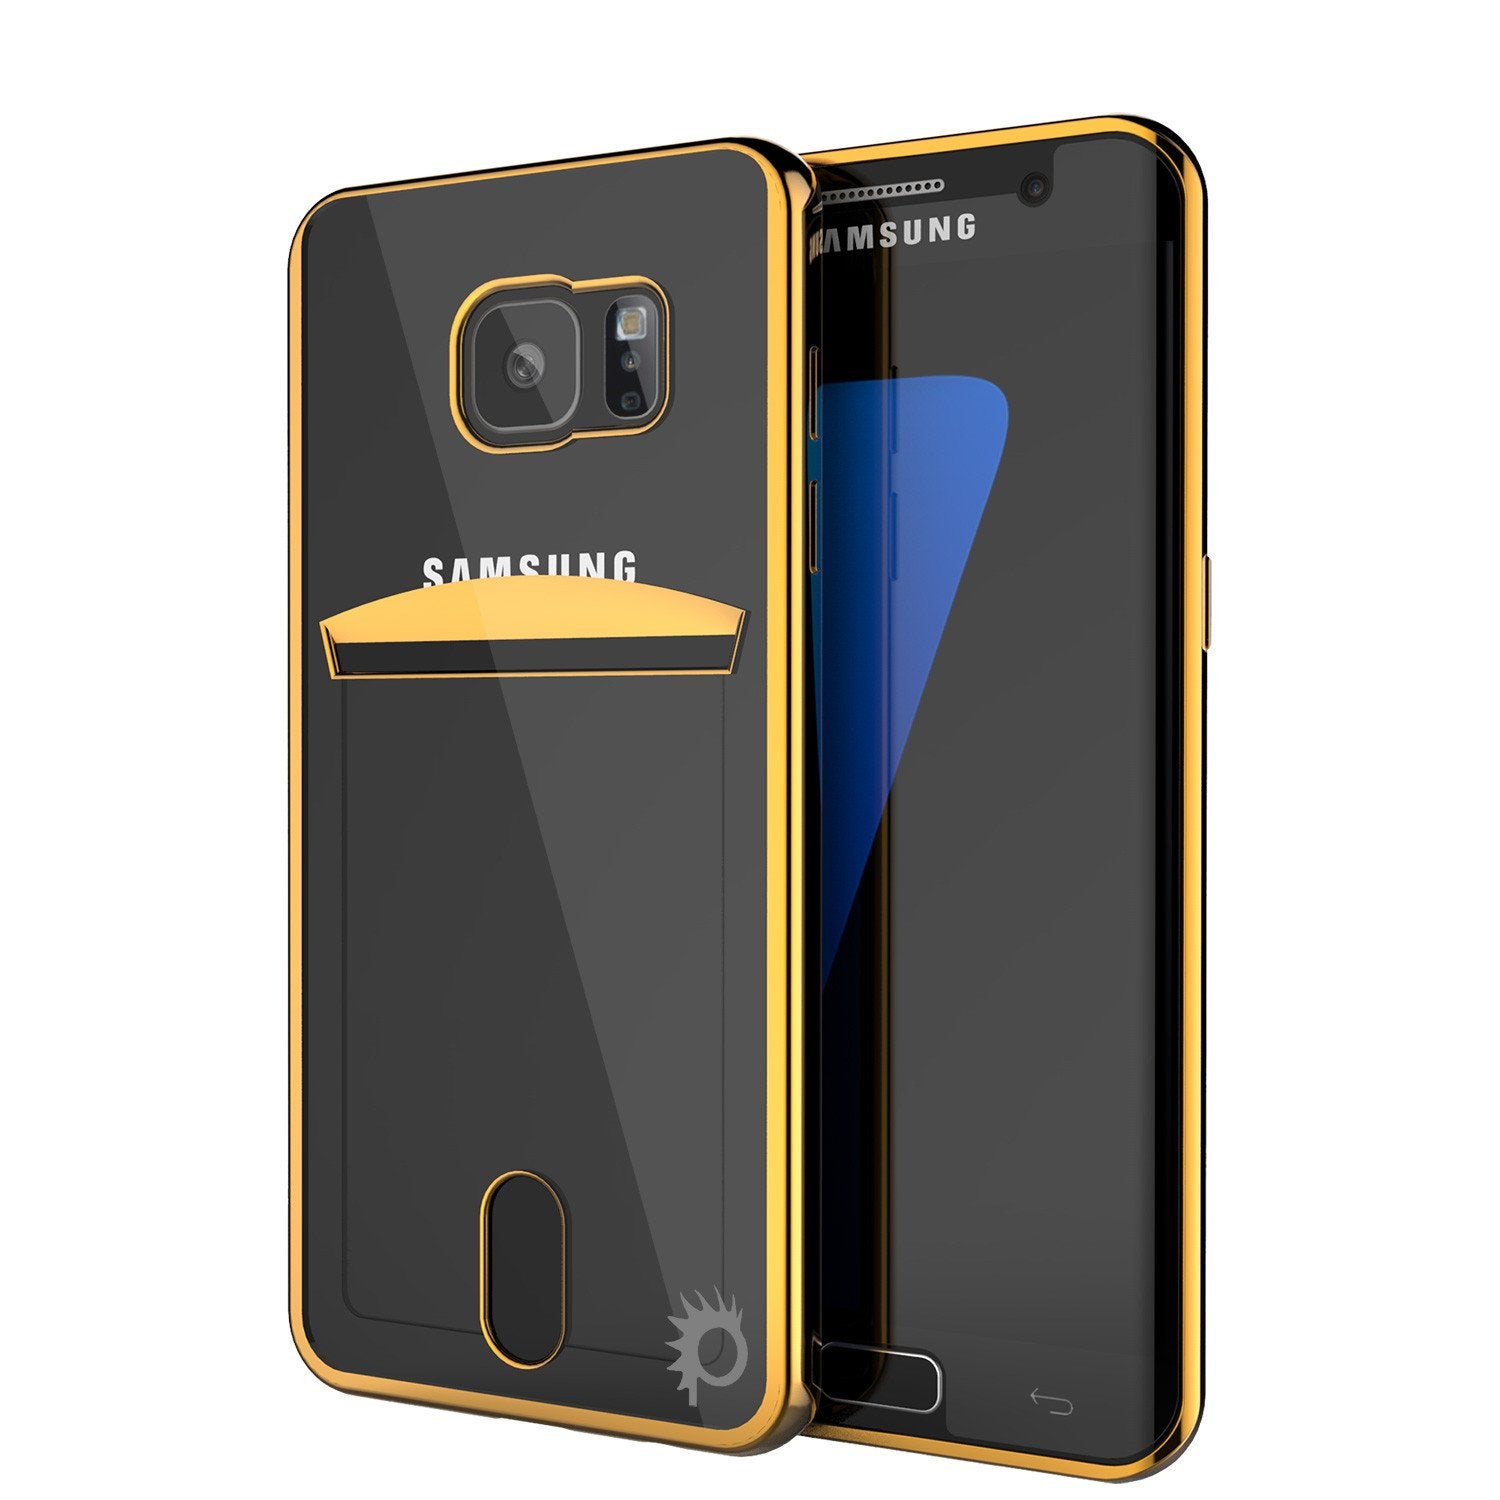 Galaxy S7 Case, PUNKCASE® LUCID Gold Series | Card Slot | SHIELD Screen Protector | Ultra fit